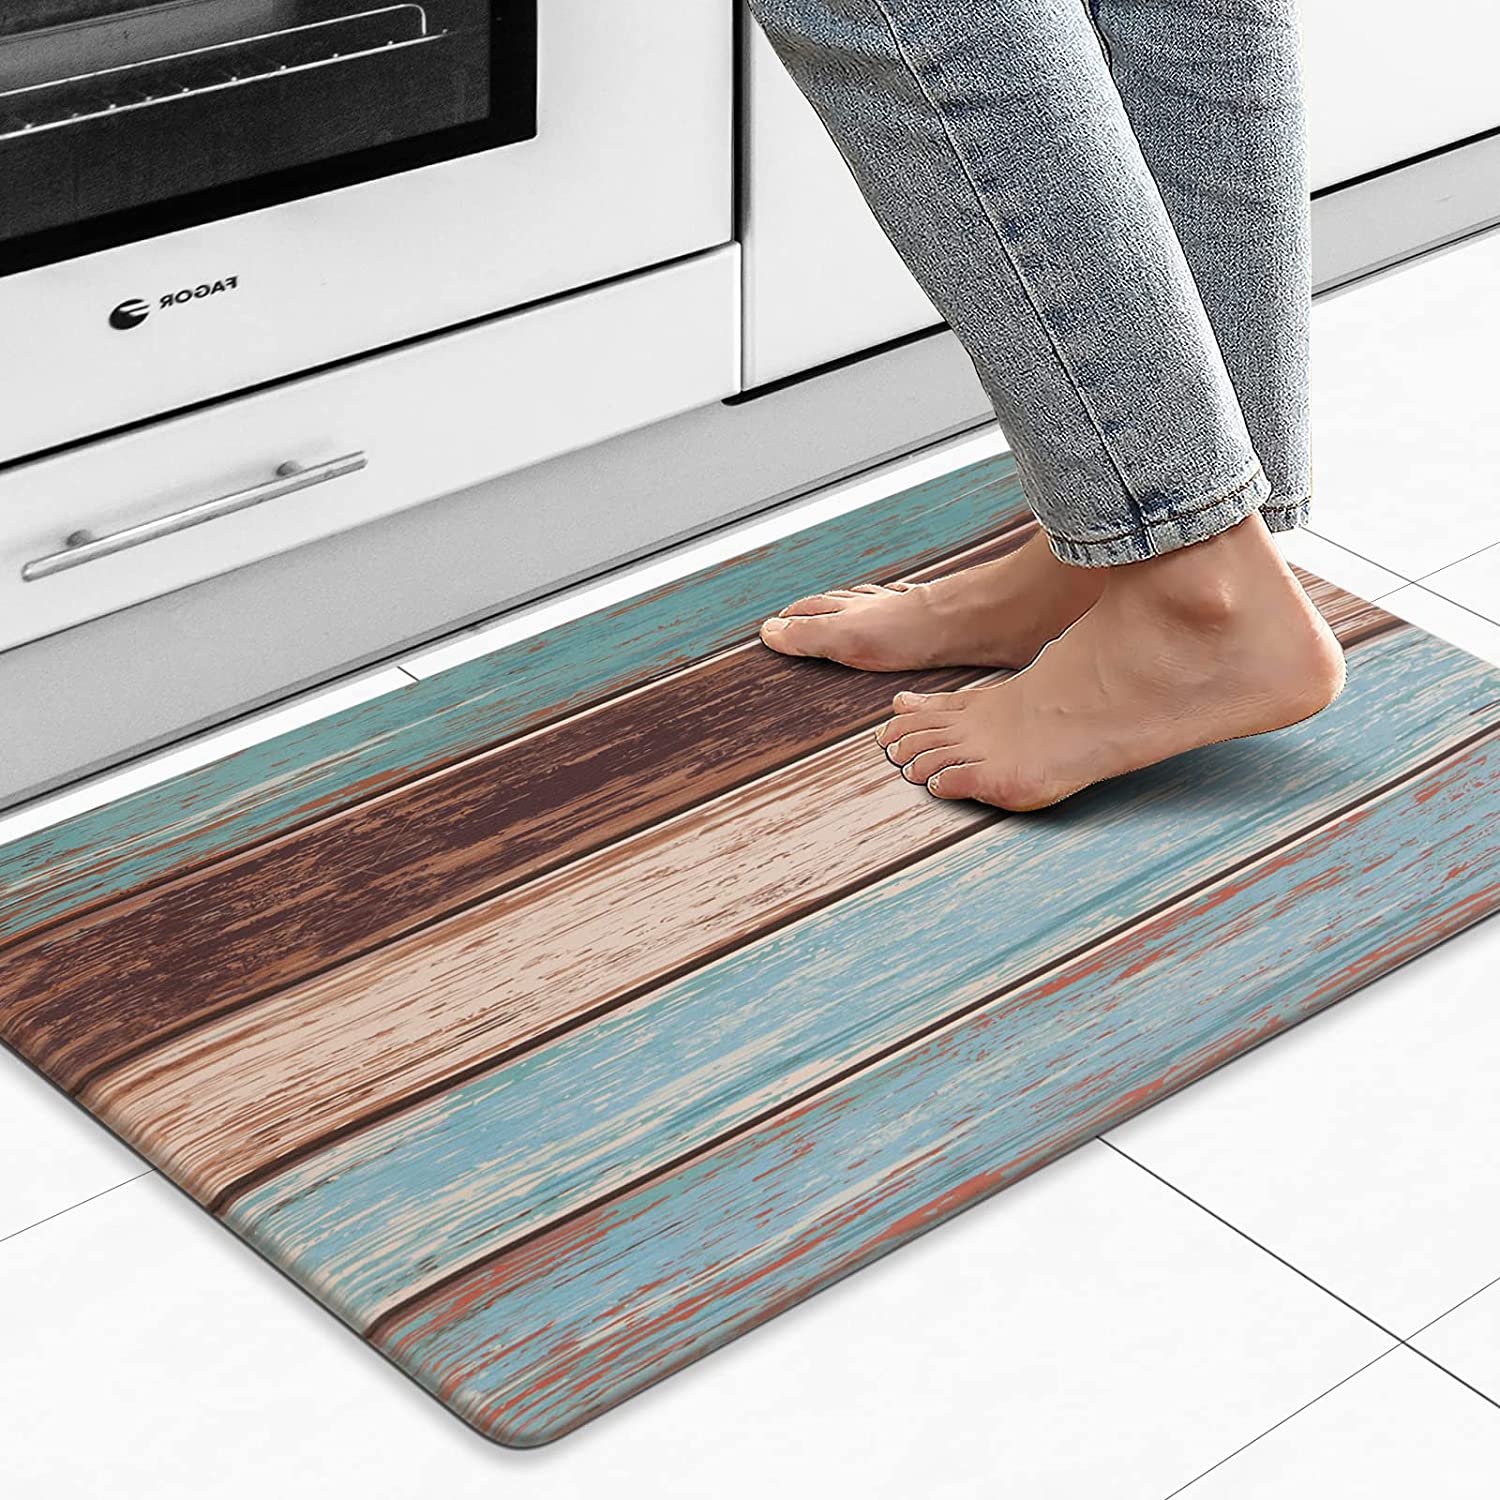 Fancy Anti-oil Kitchen Mat, Waterproof Non-Slip Kitchen Mats and Rugs PVC Comfort Foam Rug for Kitchen, Floor Home, Office, Sink, Laundry, Size